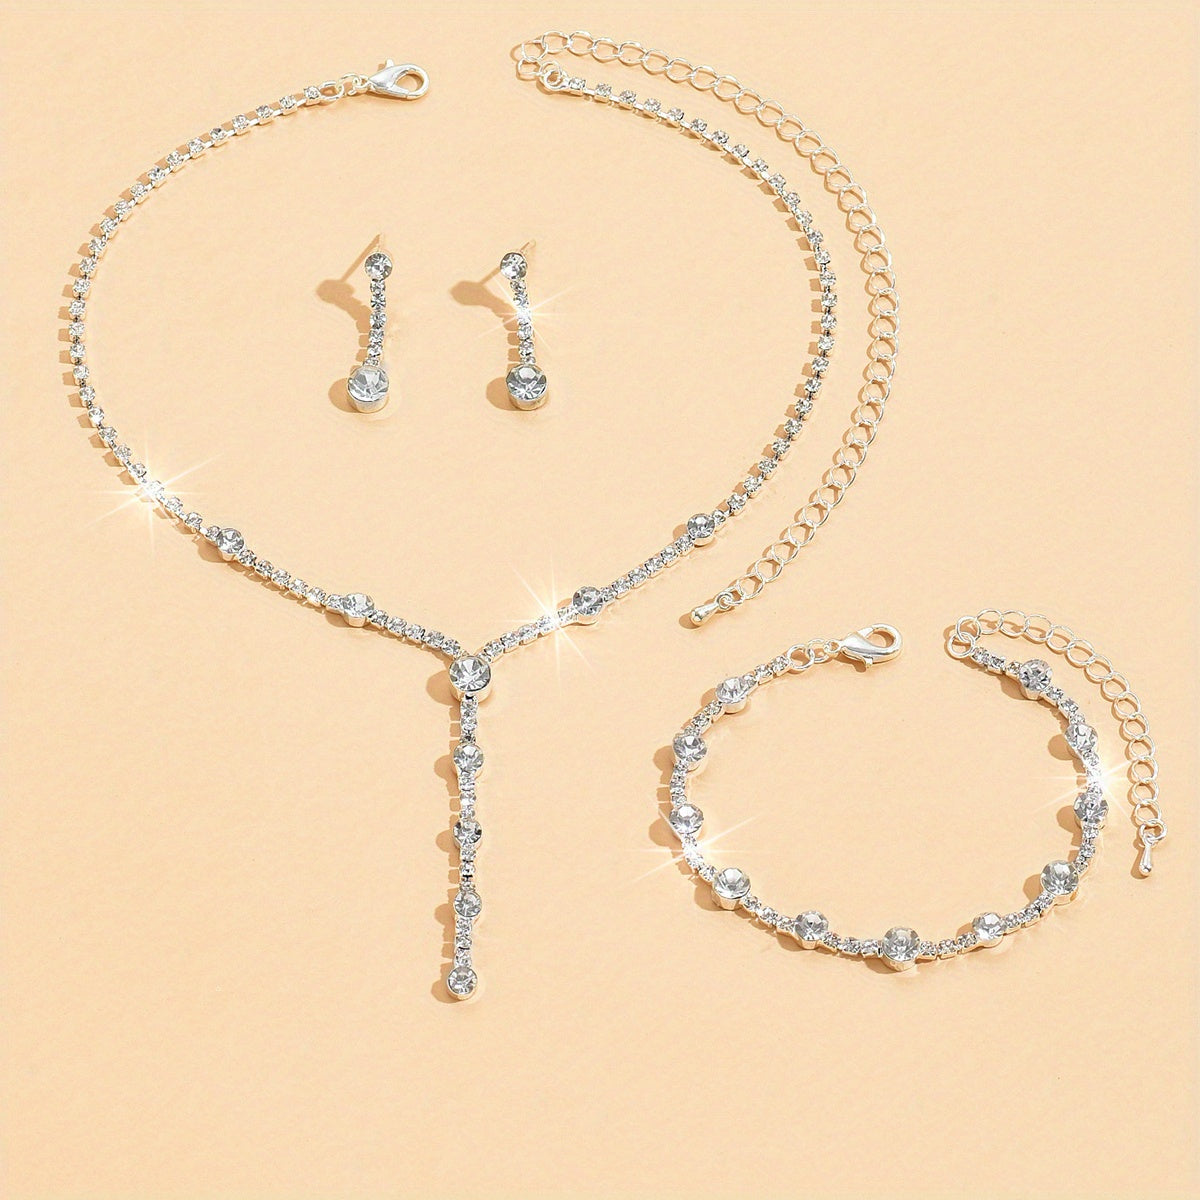 4pcs Necklace Earrings Plus Bracelet Elegant Jewelry Set Silver Plated Inlaid Rhinestone Match Daily Outfits Dainty Cocktail Party Accessories